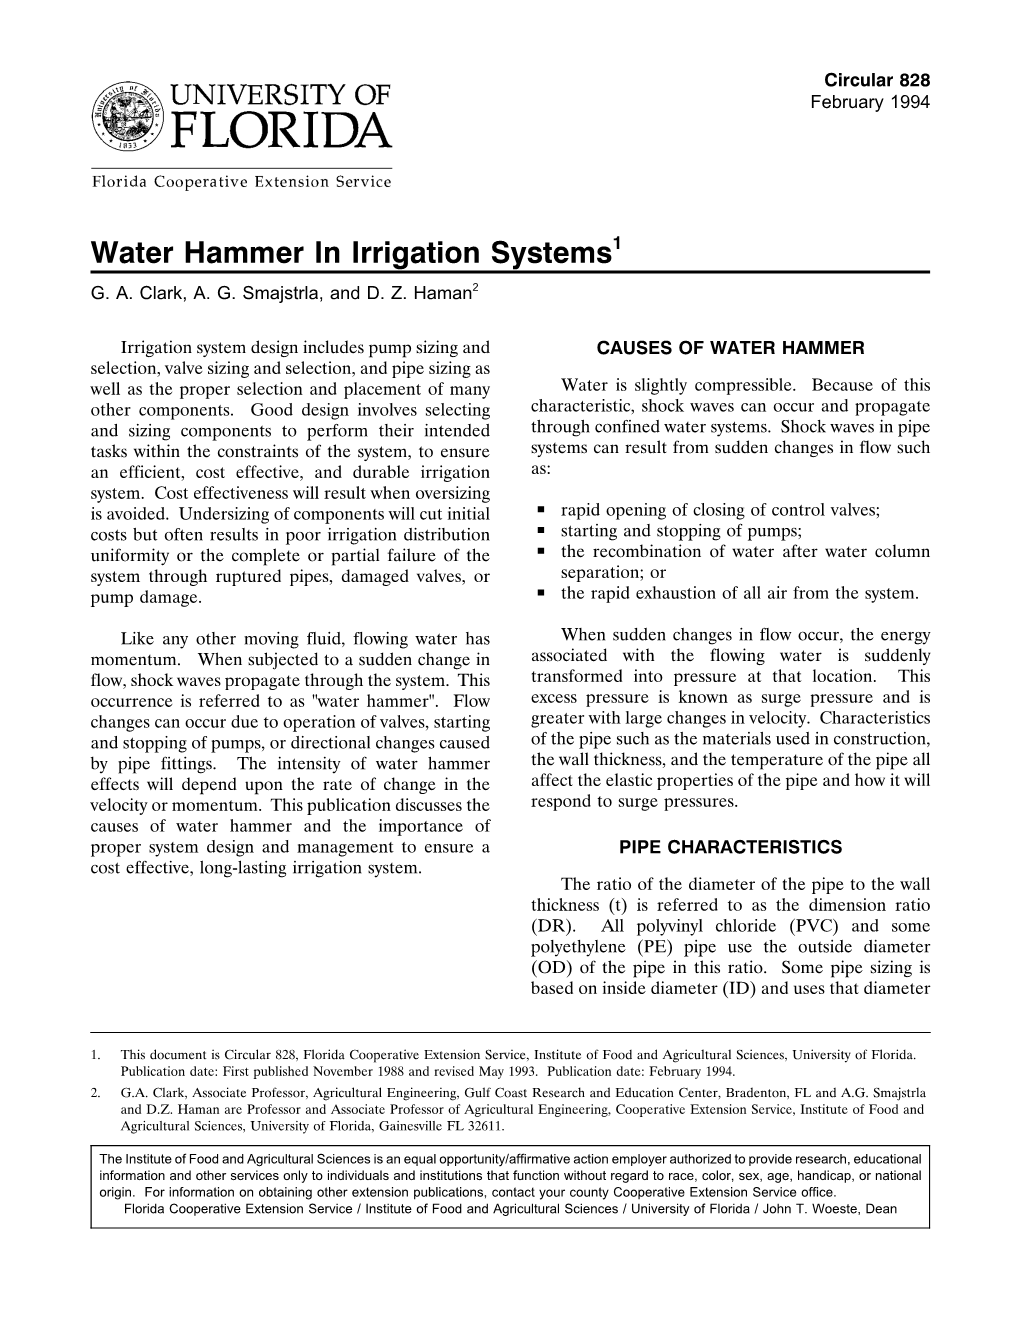 Water Hammer in Irrigation Systems1 G